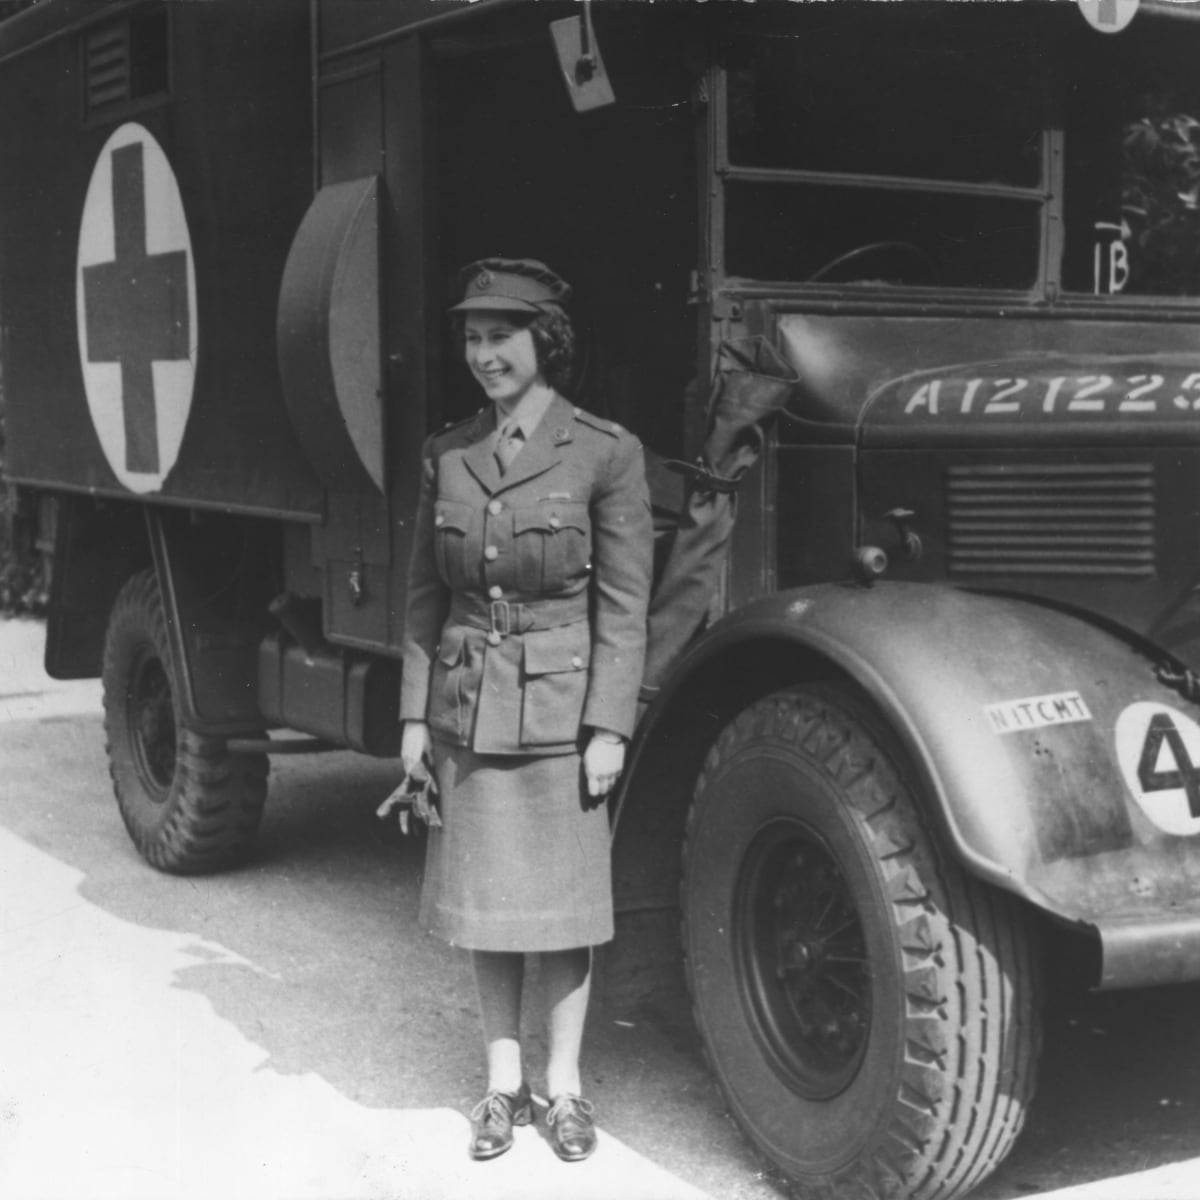 We want to pay our respects to #QueenElizabethII one of the more famous drivers of ambulances during #WW2. #RIPQueenElizabeth #RIP #EMS #Ambulance #EmergencyMedical #QueenElizabeth #KingCharles #thoughtsandprayers #RoyalFamily